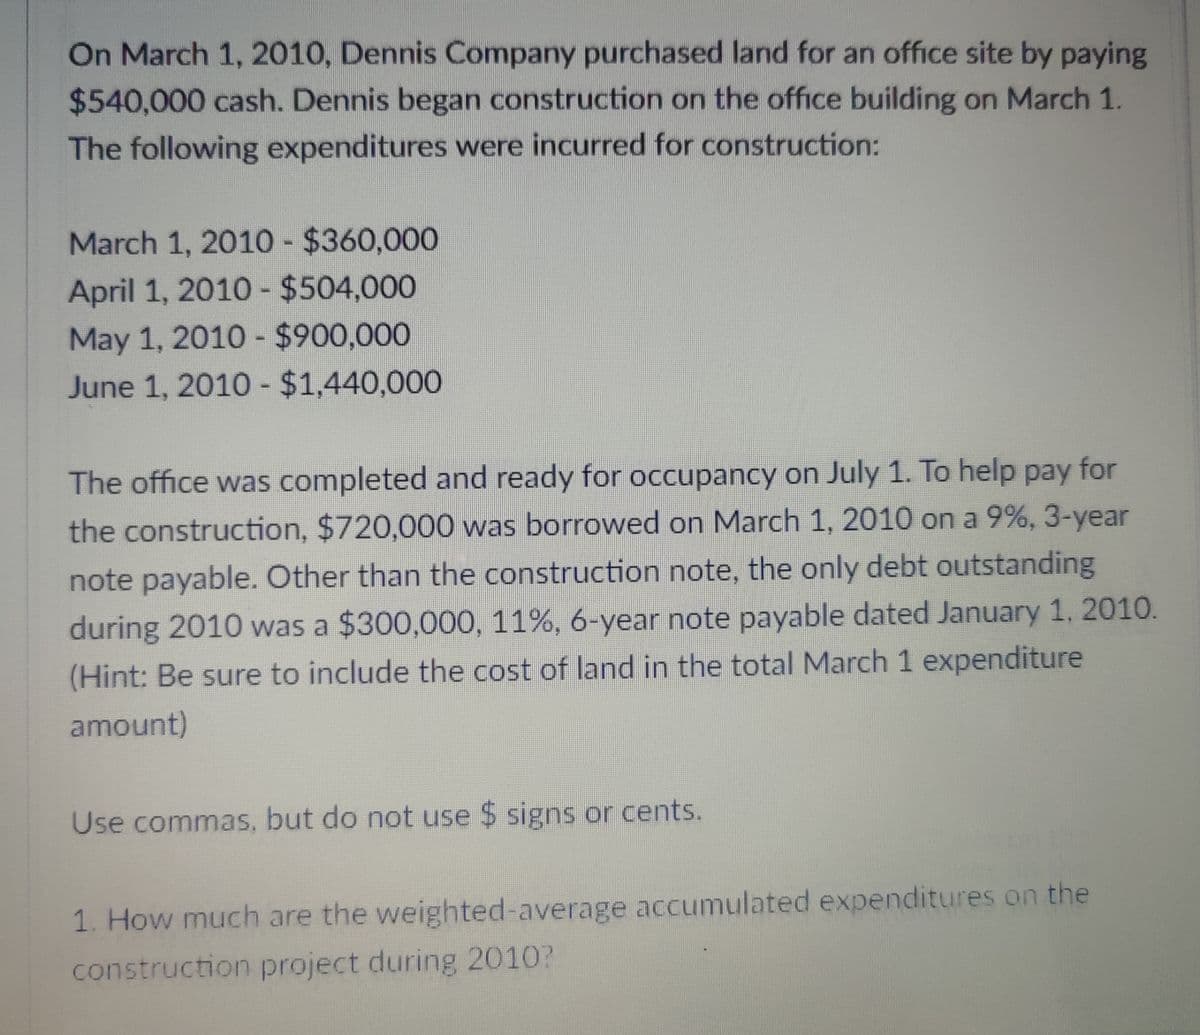 On March 1, 2010, Dennis Company purchased land for an office site by paying
$540,000 cash. Dennis began construction on the office building on March 1.
The following expenditures were incurred for construction:
March 1, 2010 - $360,000
April 1, 2010 - $504,000
May 1, 2010 - $900,000
June 1, 2010 - $1,440,000
The office was completed and ready for occupancy on July 1. To help pay for
the construction, $720,000 was borrowed on March 1, 2010 on a 9%, 3-year
note payable. Other than the construction note, the only debt outstanding
during 2010 was a $300,000, 11%, 6-year note payable dated January 1, 2010.
(Hint: Be sure to include the cost of land in the total March 1 expenditure
amount)
Use commas, but do not use $ signs or cents.
1. How much are the weighted-average accumulated expenditures on the
construction project during 2010?